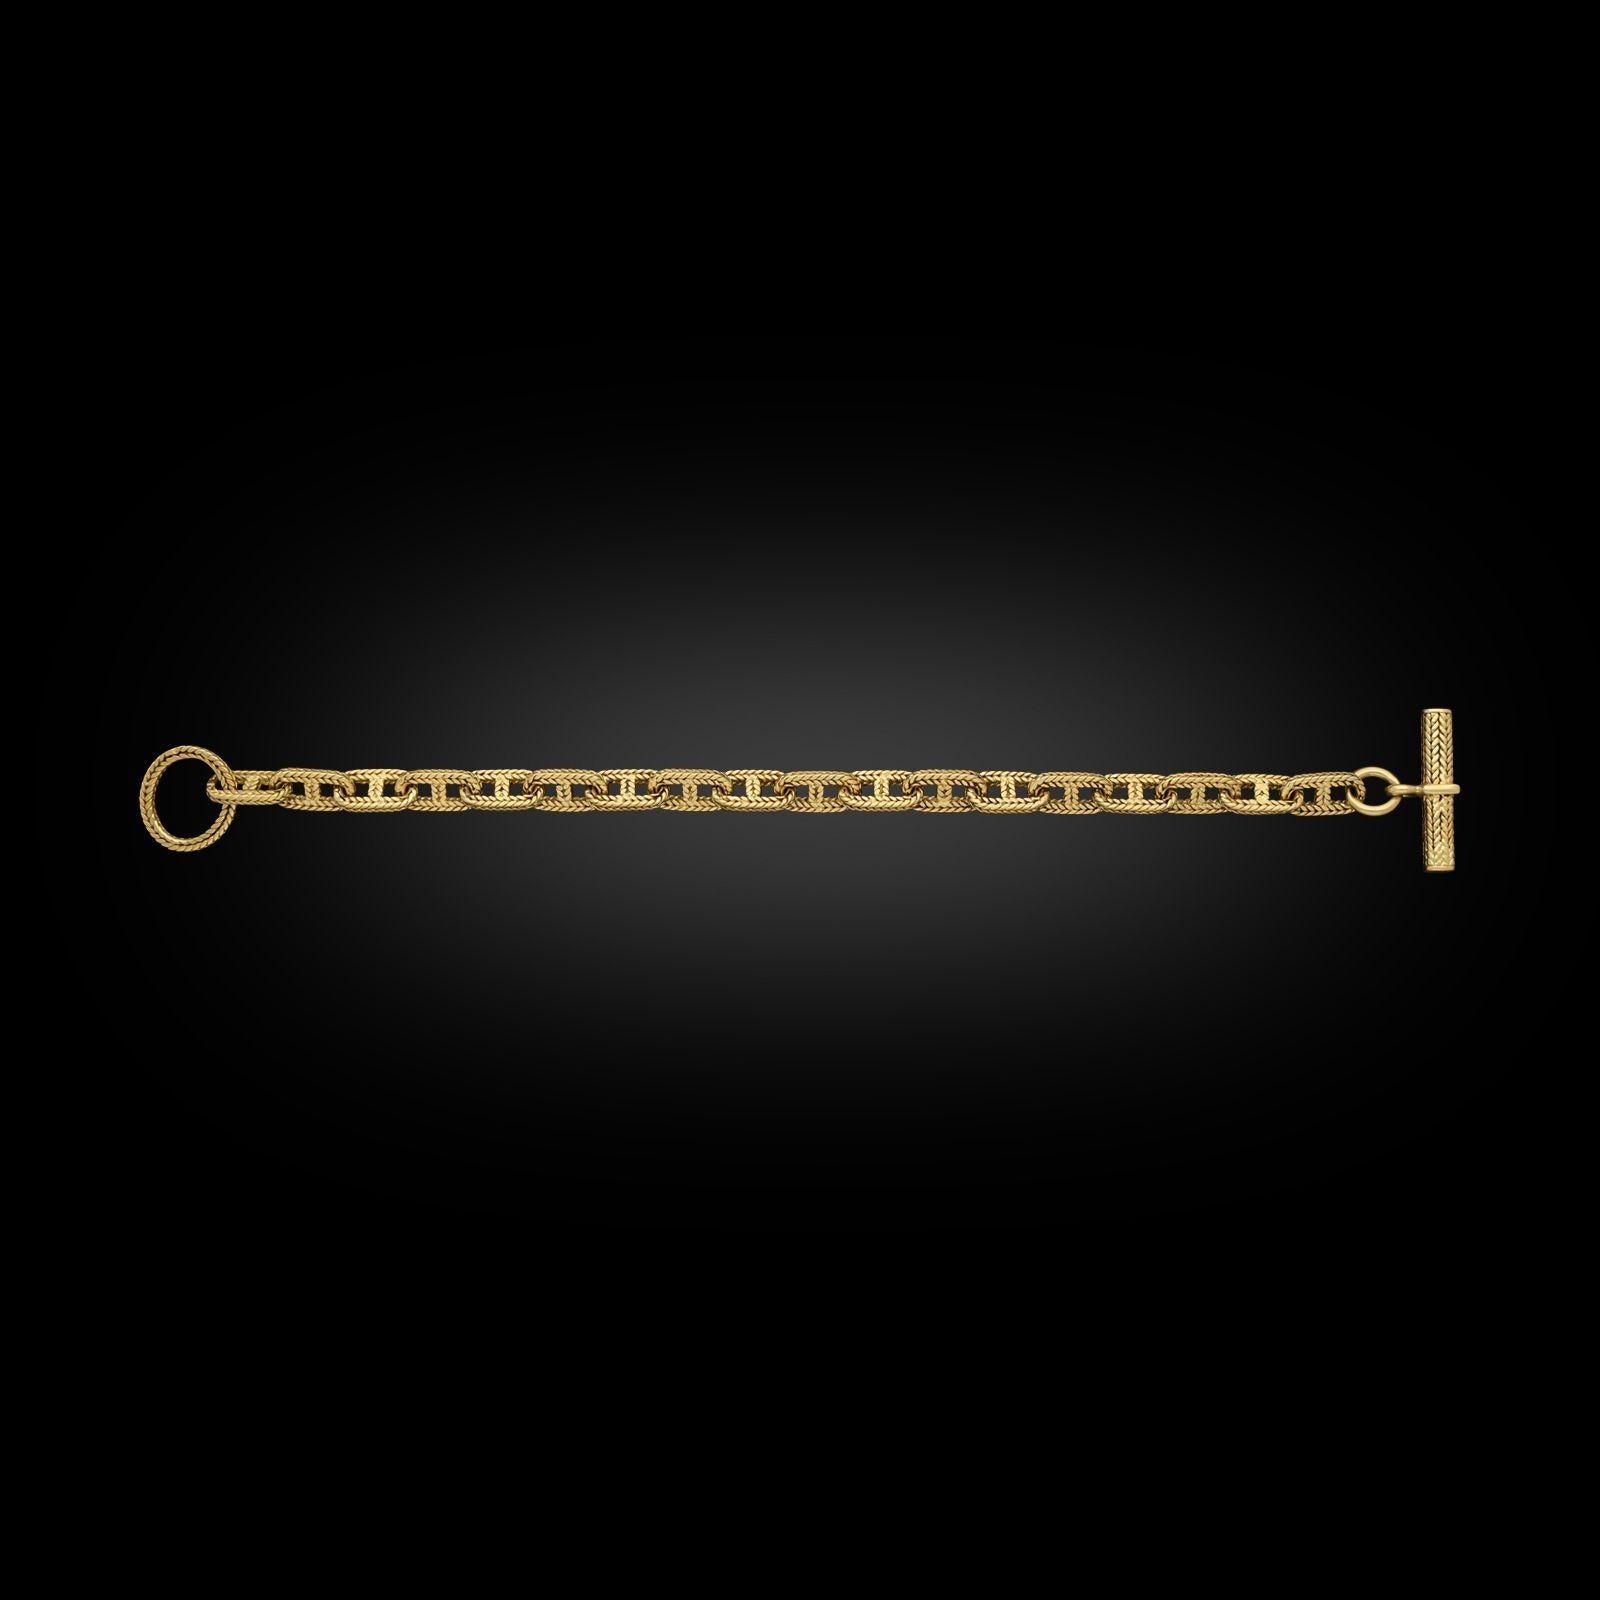 A stylish vintage gold Chaine d'Ancre bracelet by Hermès c.1960s, formed of eighteen uniform oval links each with central bar in textured rope twist 18ct yellow gold with a circular ring at one end and a bar at the other forming a toggle style